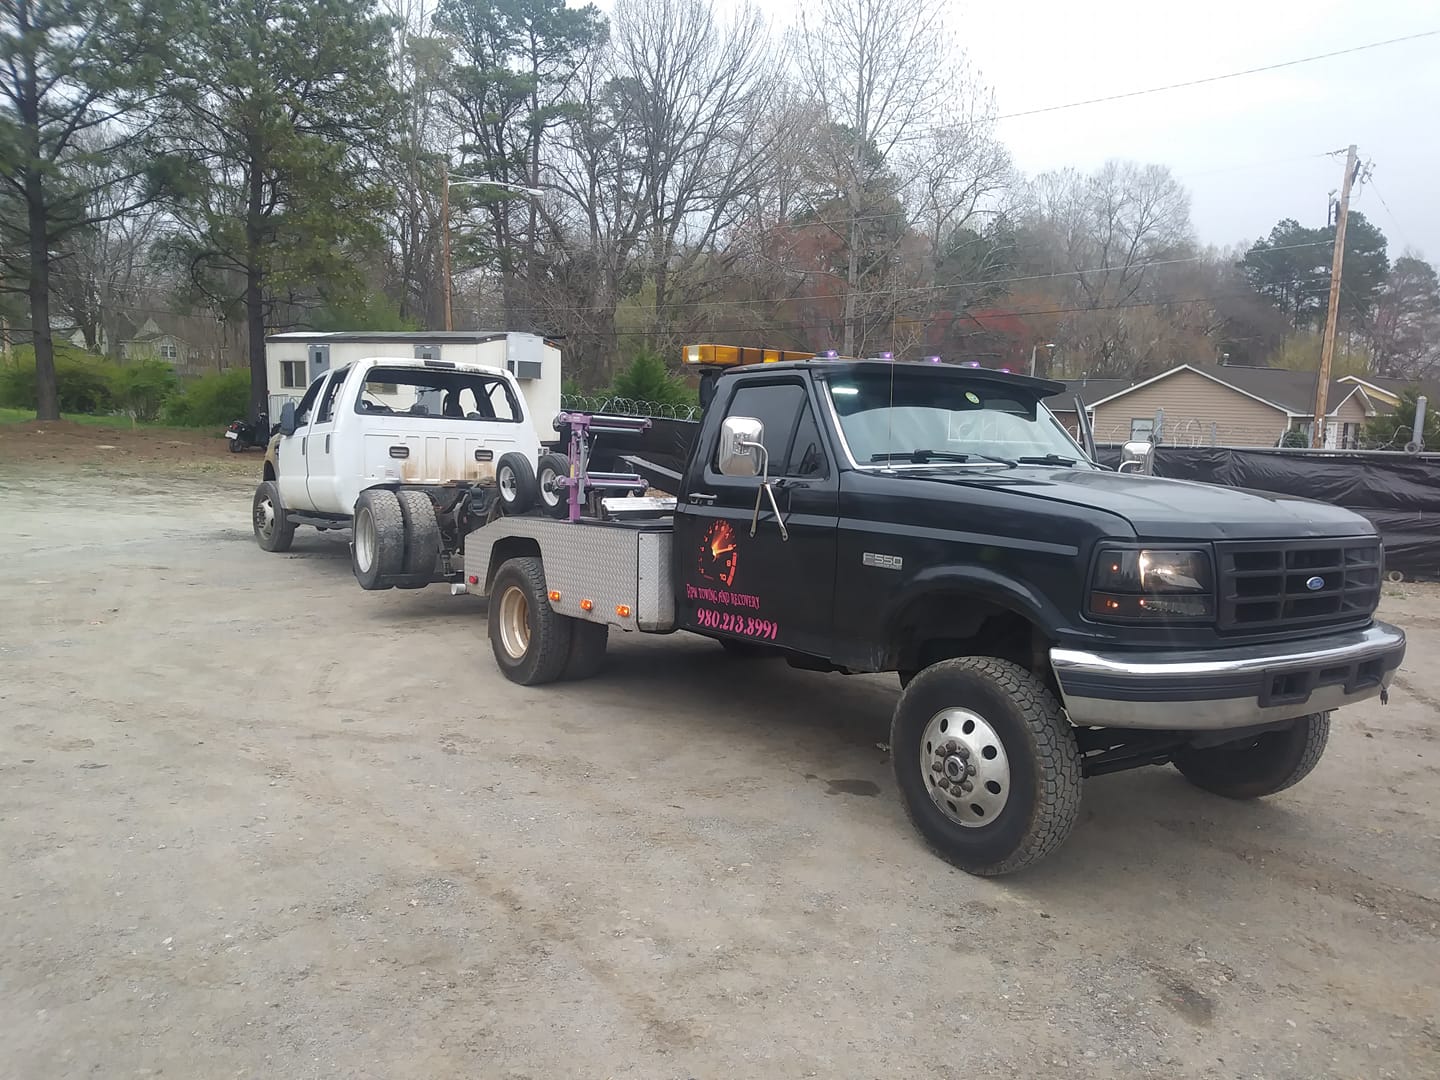 RPM Towing Gastonia, NC tow